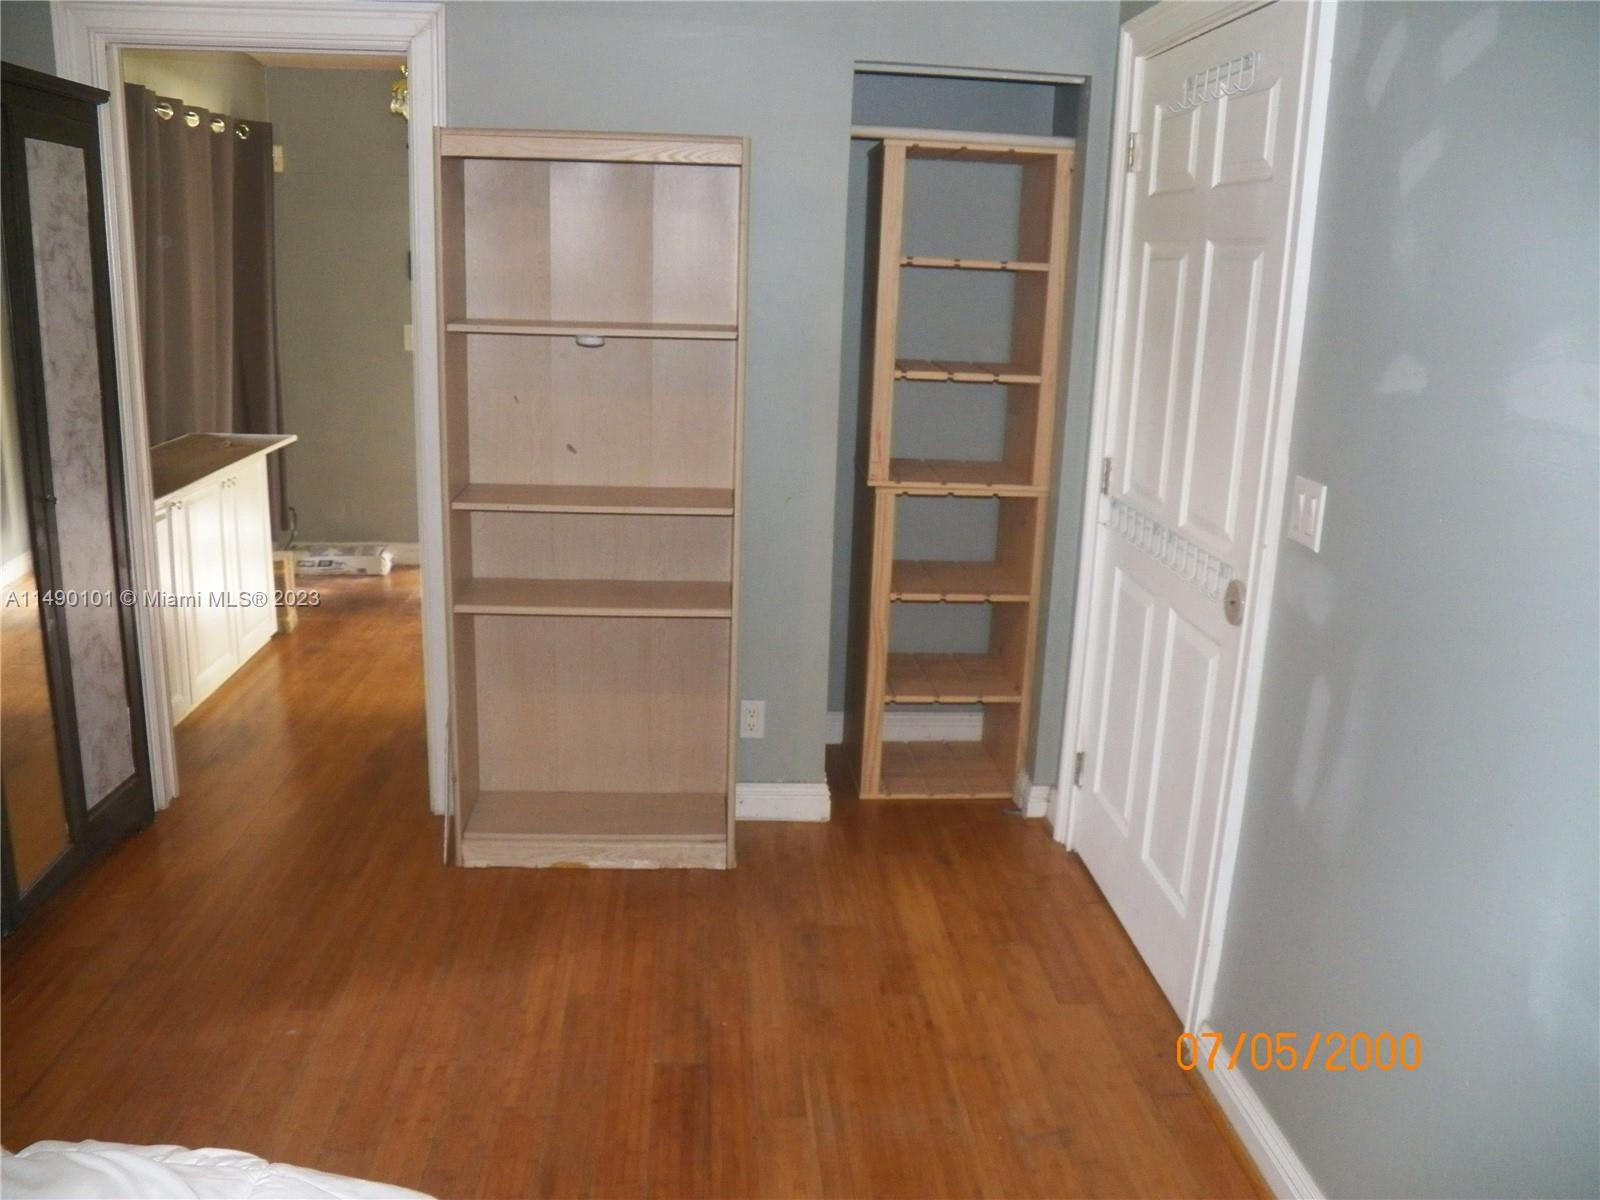 a view of walk in closet with empty racks